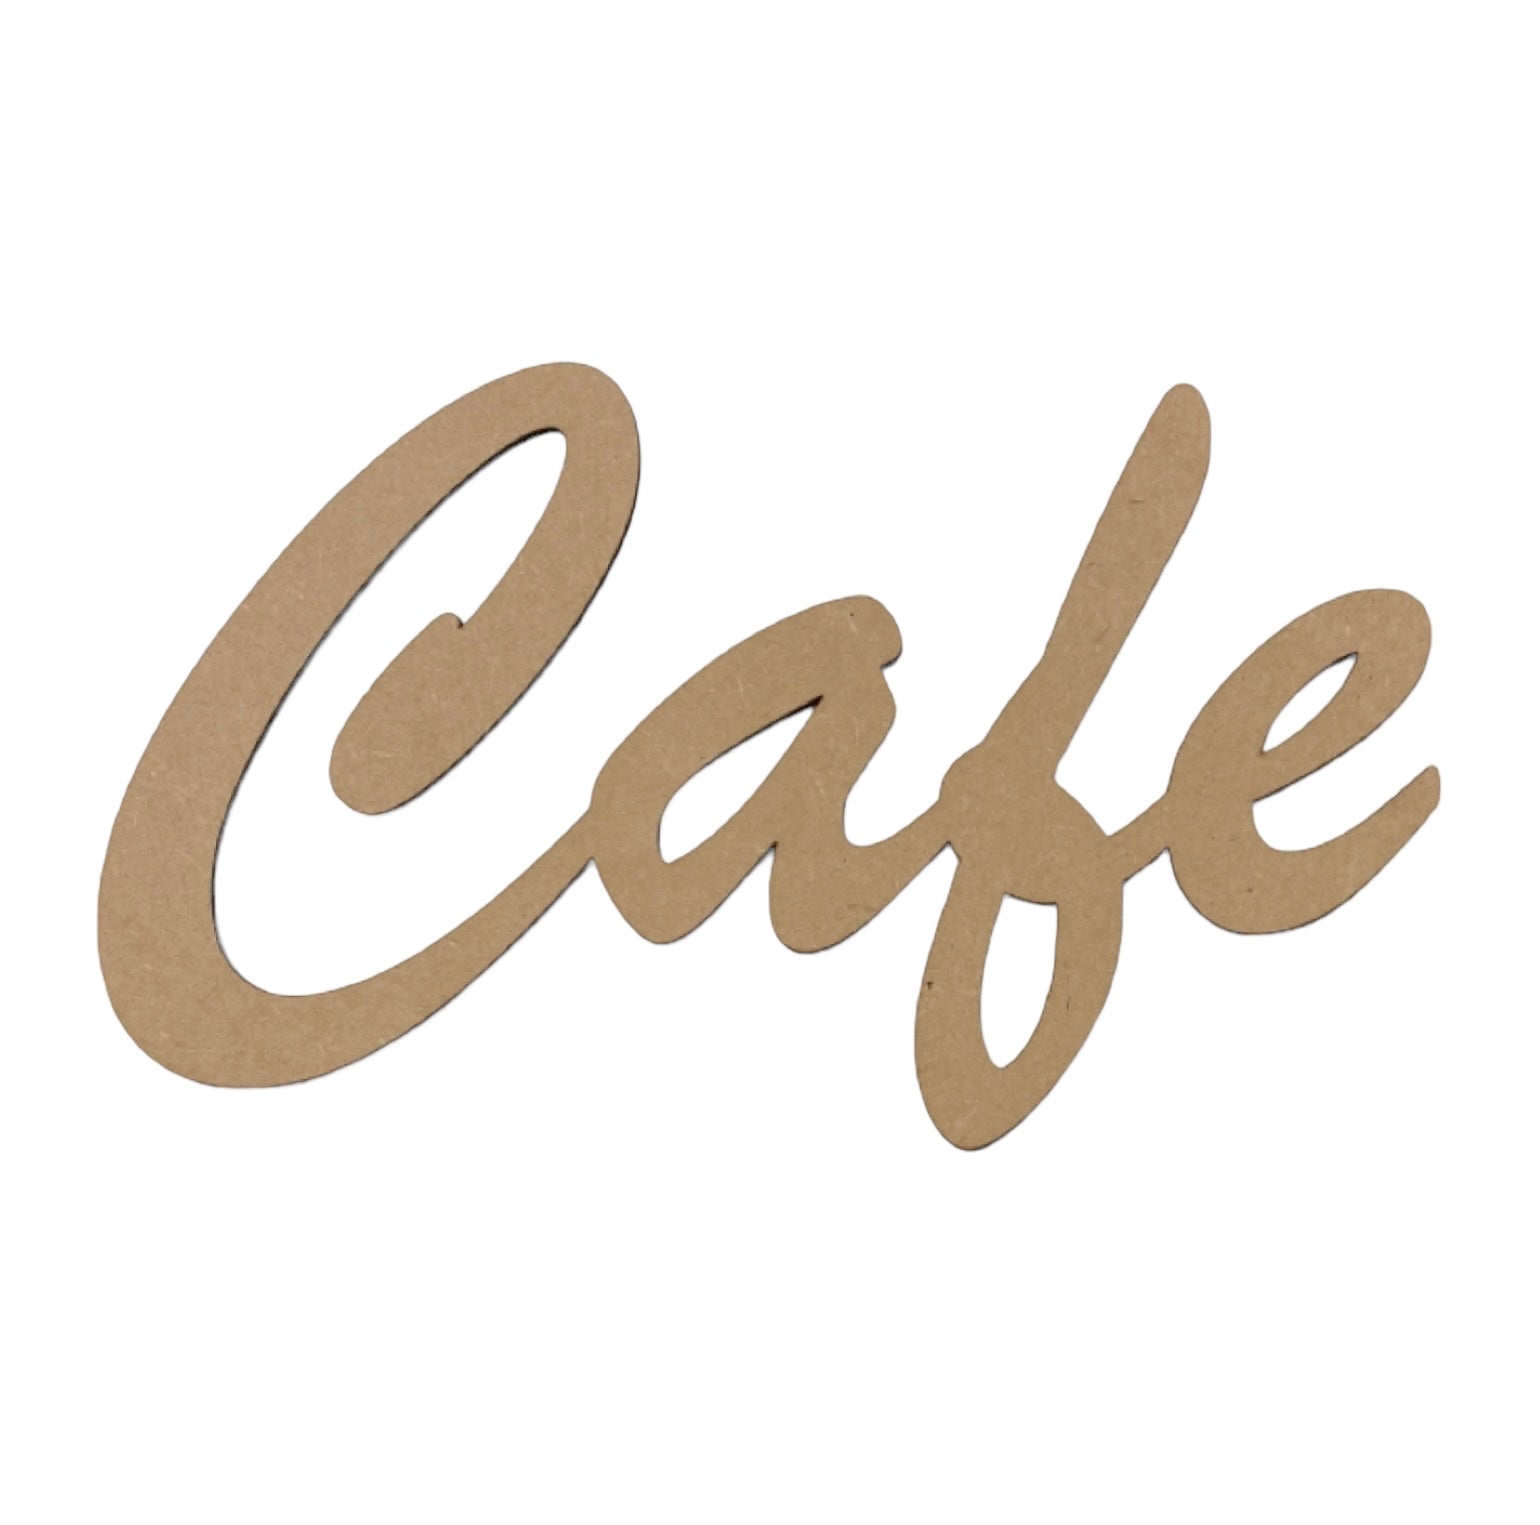 Cafe Coffee Tea Station Wall Word Sign MDF DIY Wooden - The Renmy Store Homewares & Gifts 